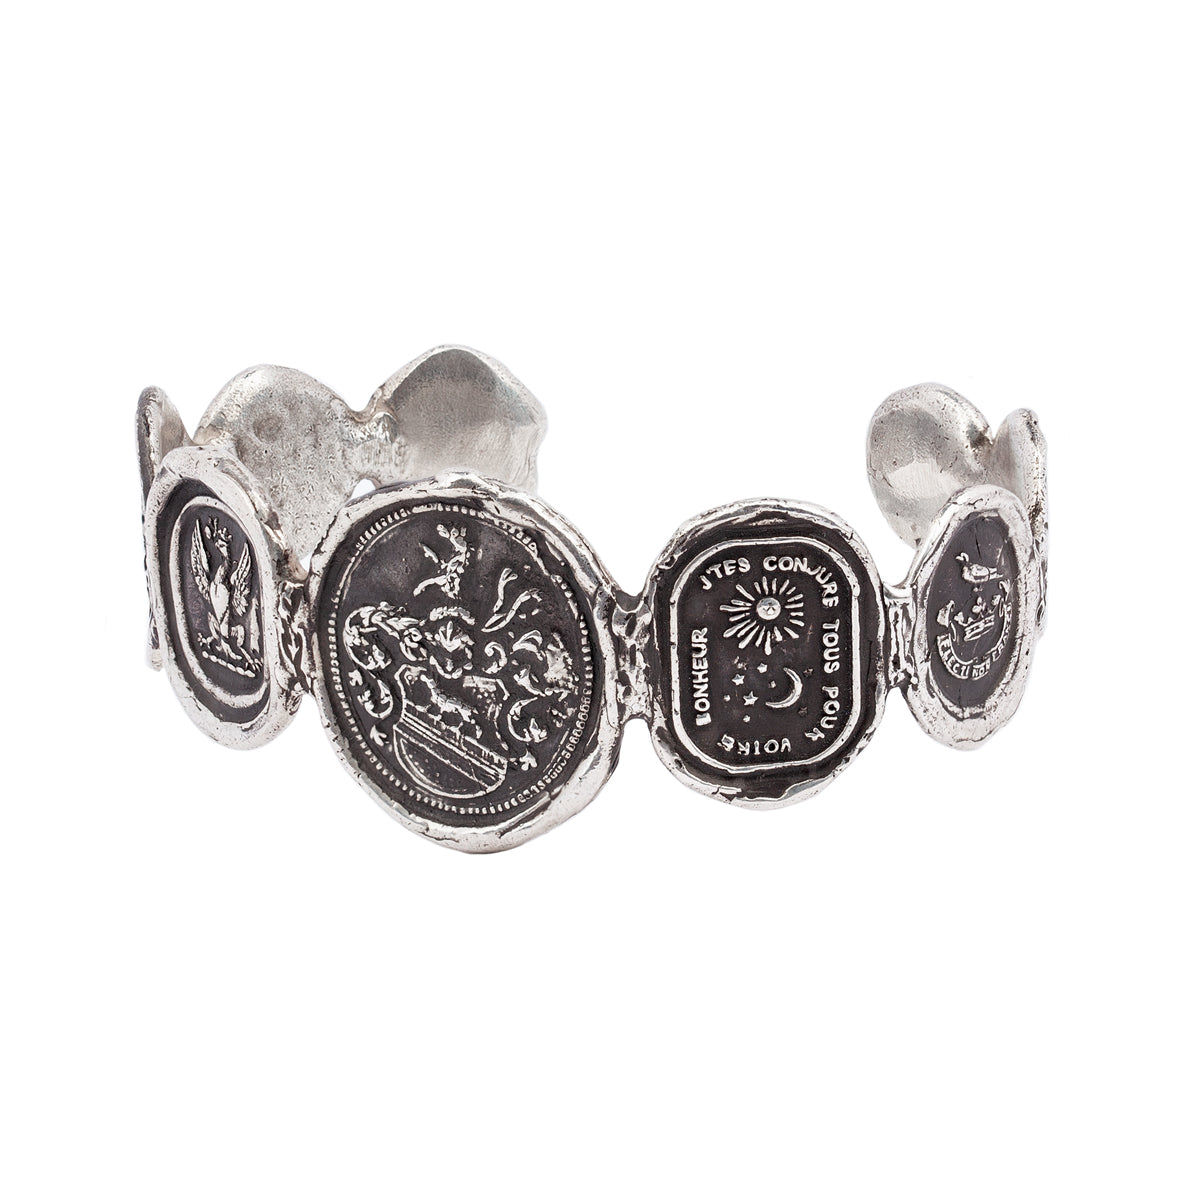 A narrow silver cuff made of multiple silver talismans. This cuff features the Heart of the Wolf talisman in the center.